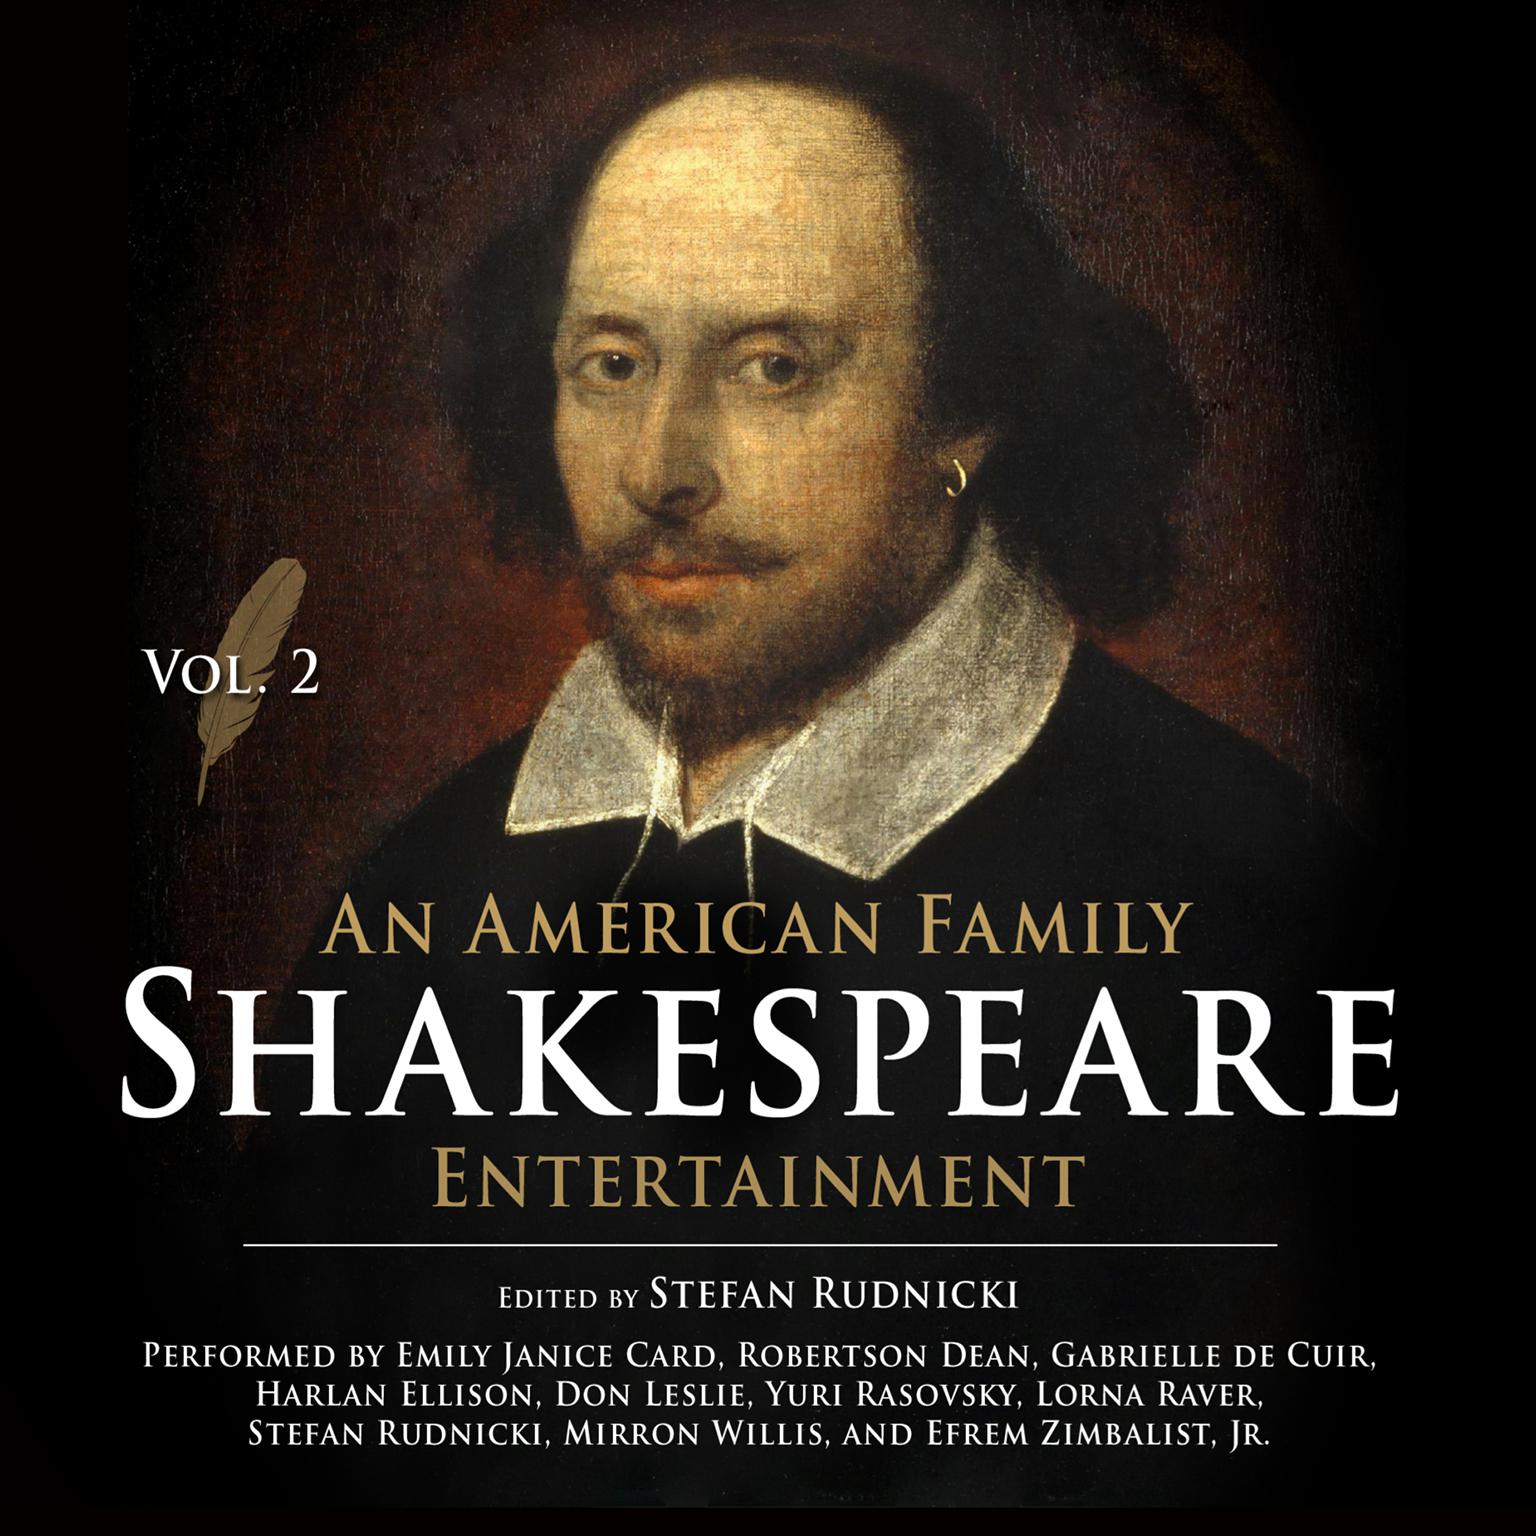 An American Family Shakespeare Entertainment, Vol. 2 (Abridged) Audiobook, by Stefan Rudnicki